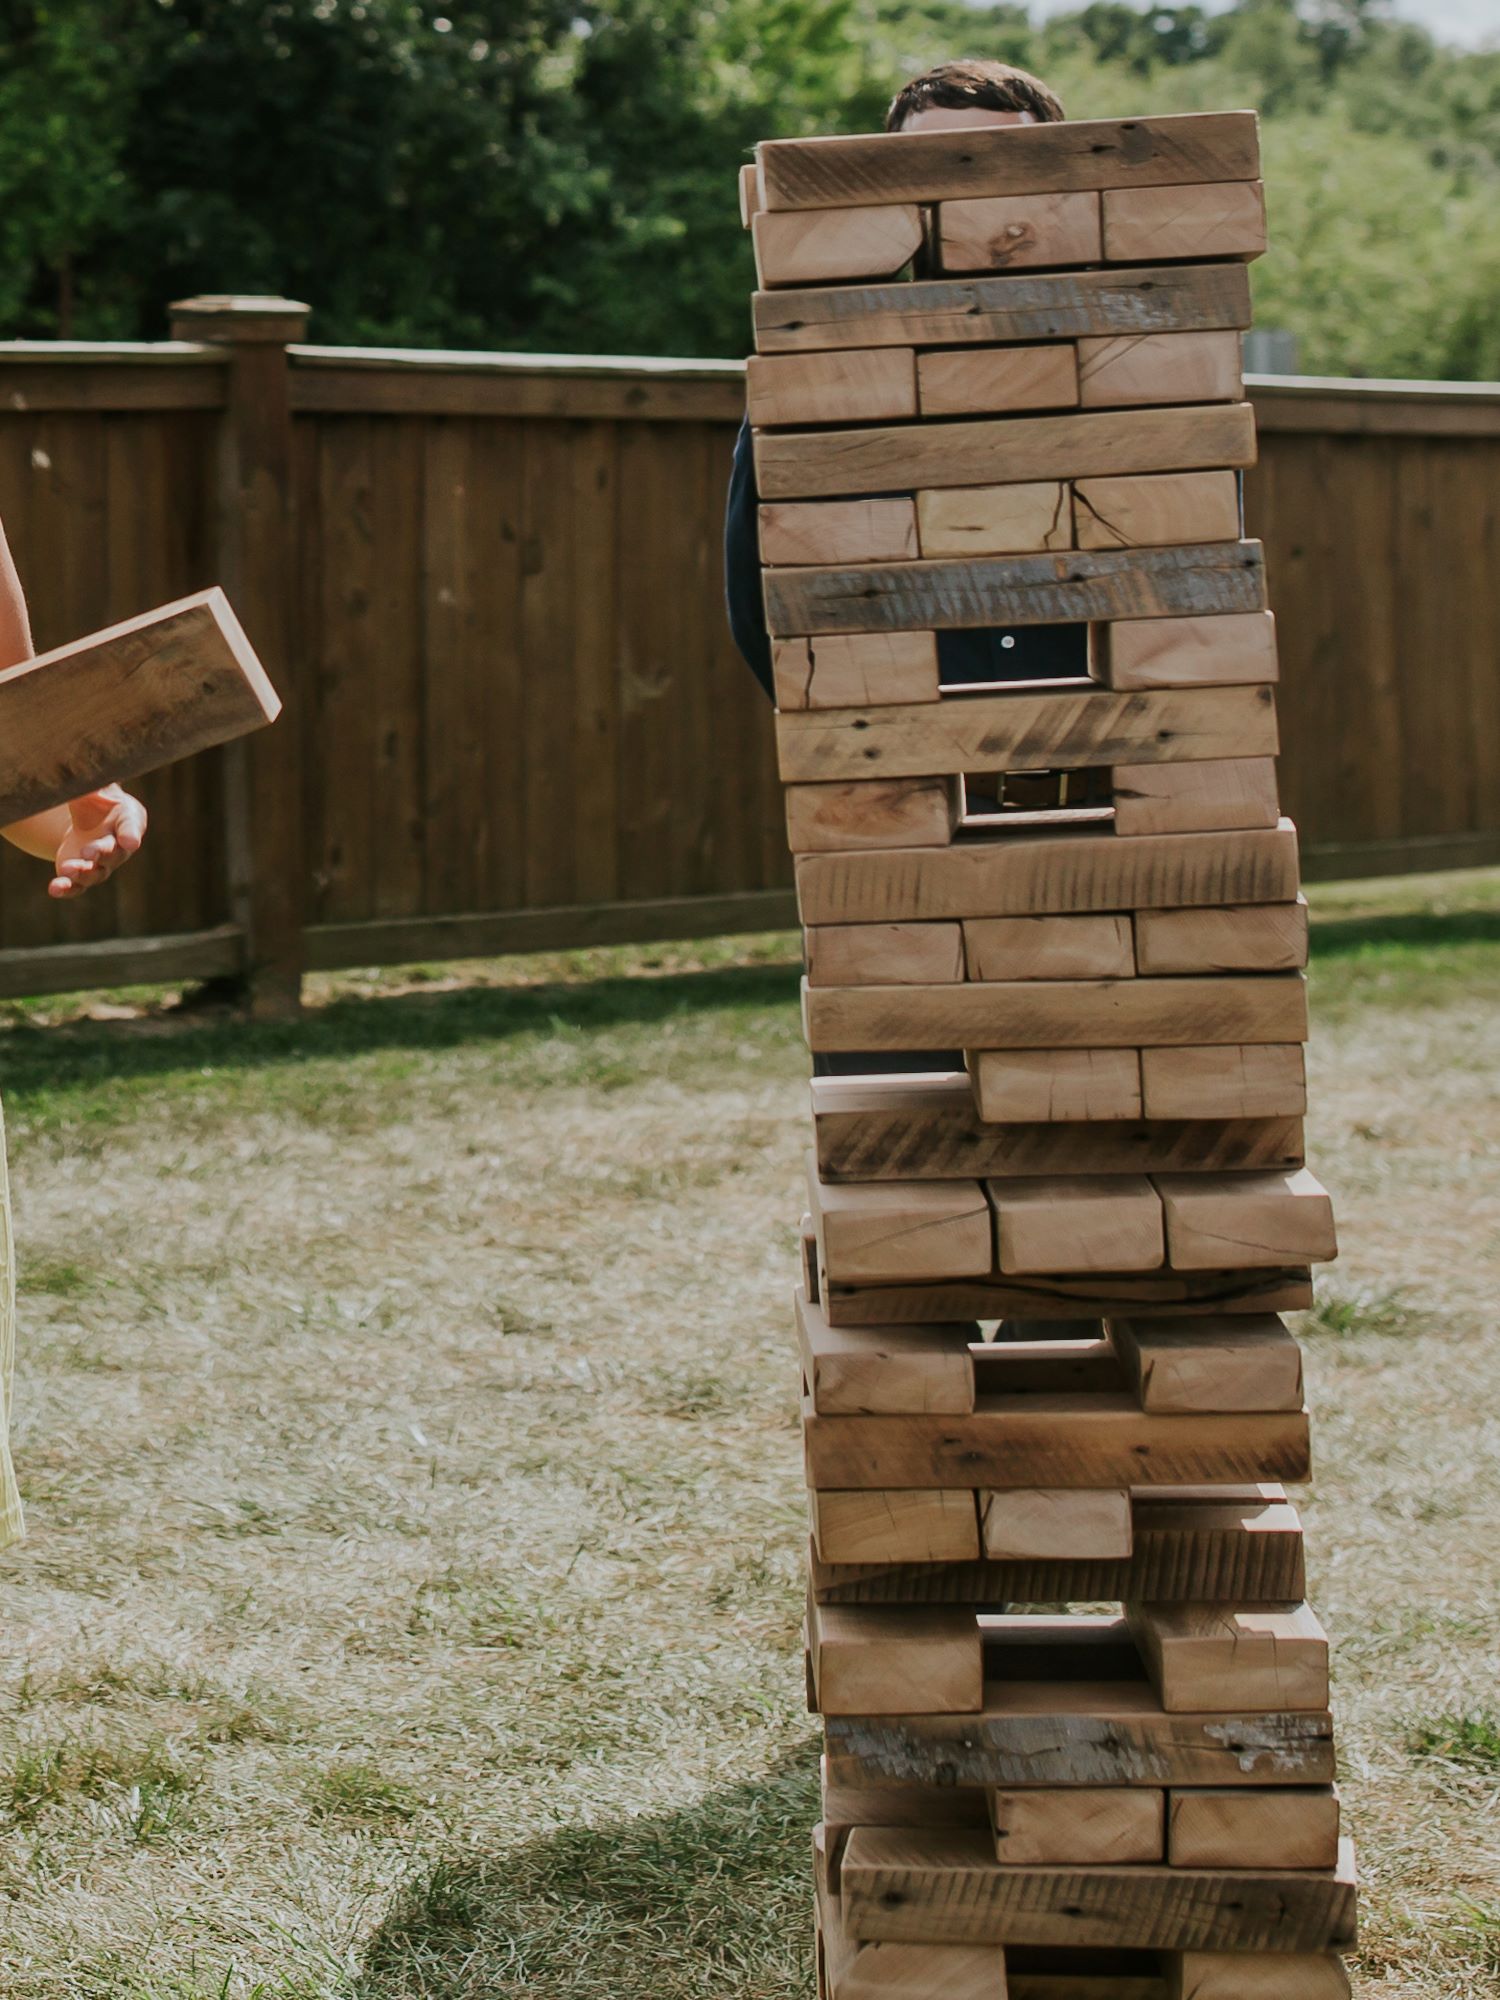 The giant jenga set being used at an outdoor wedding